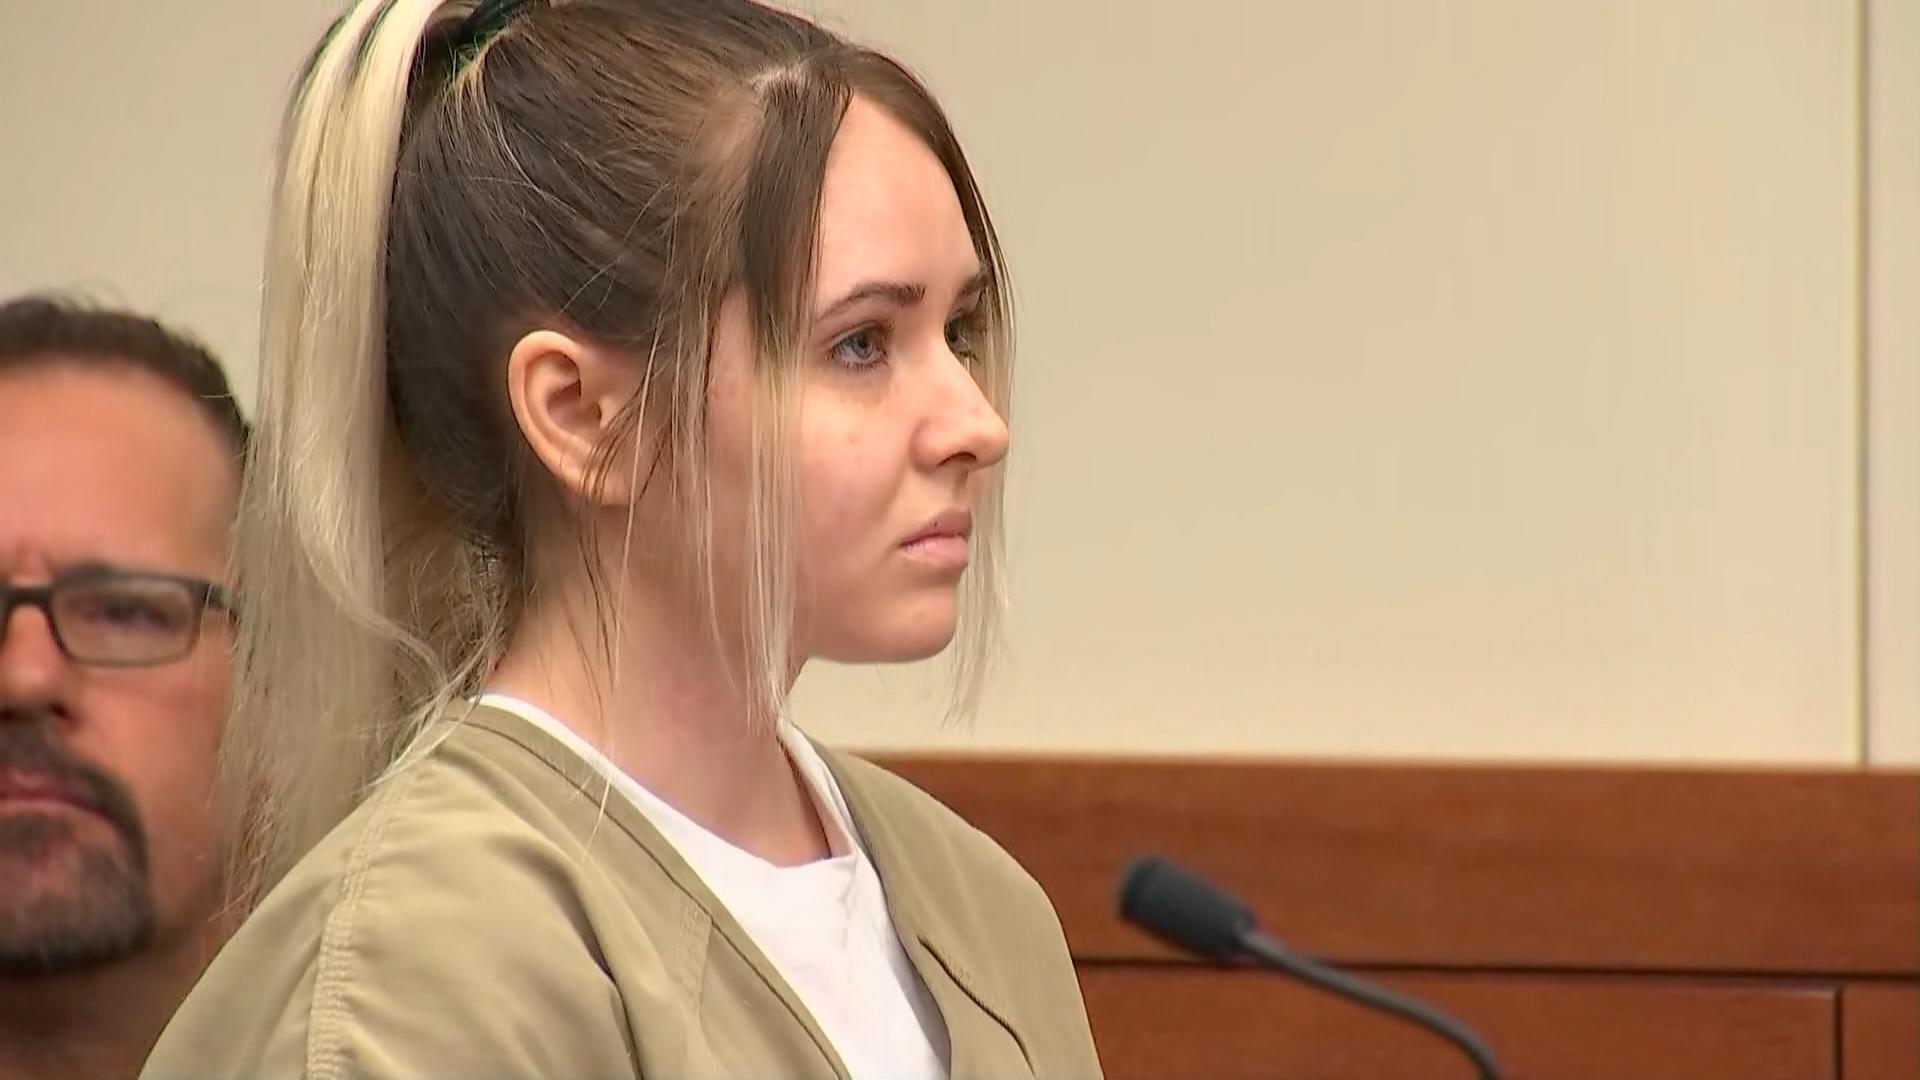 Payton Shires apologized to the court and family on Thursday as she was sentenced to prison for having sex with her 13-year-old client.